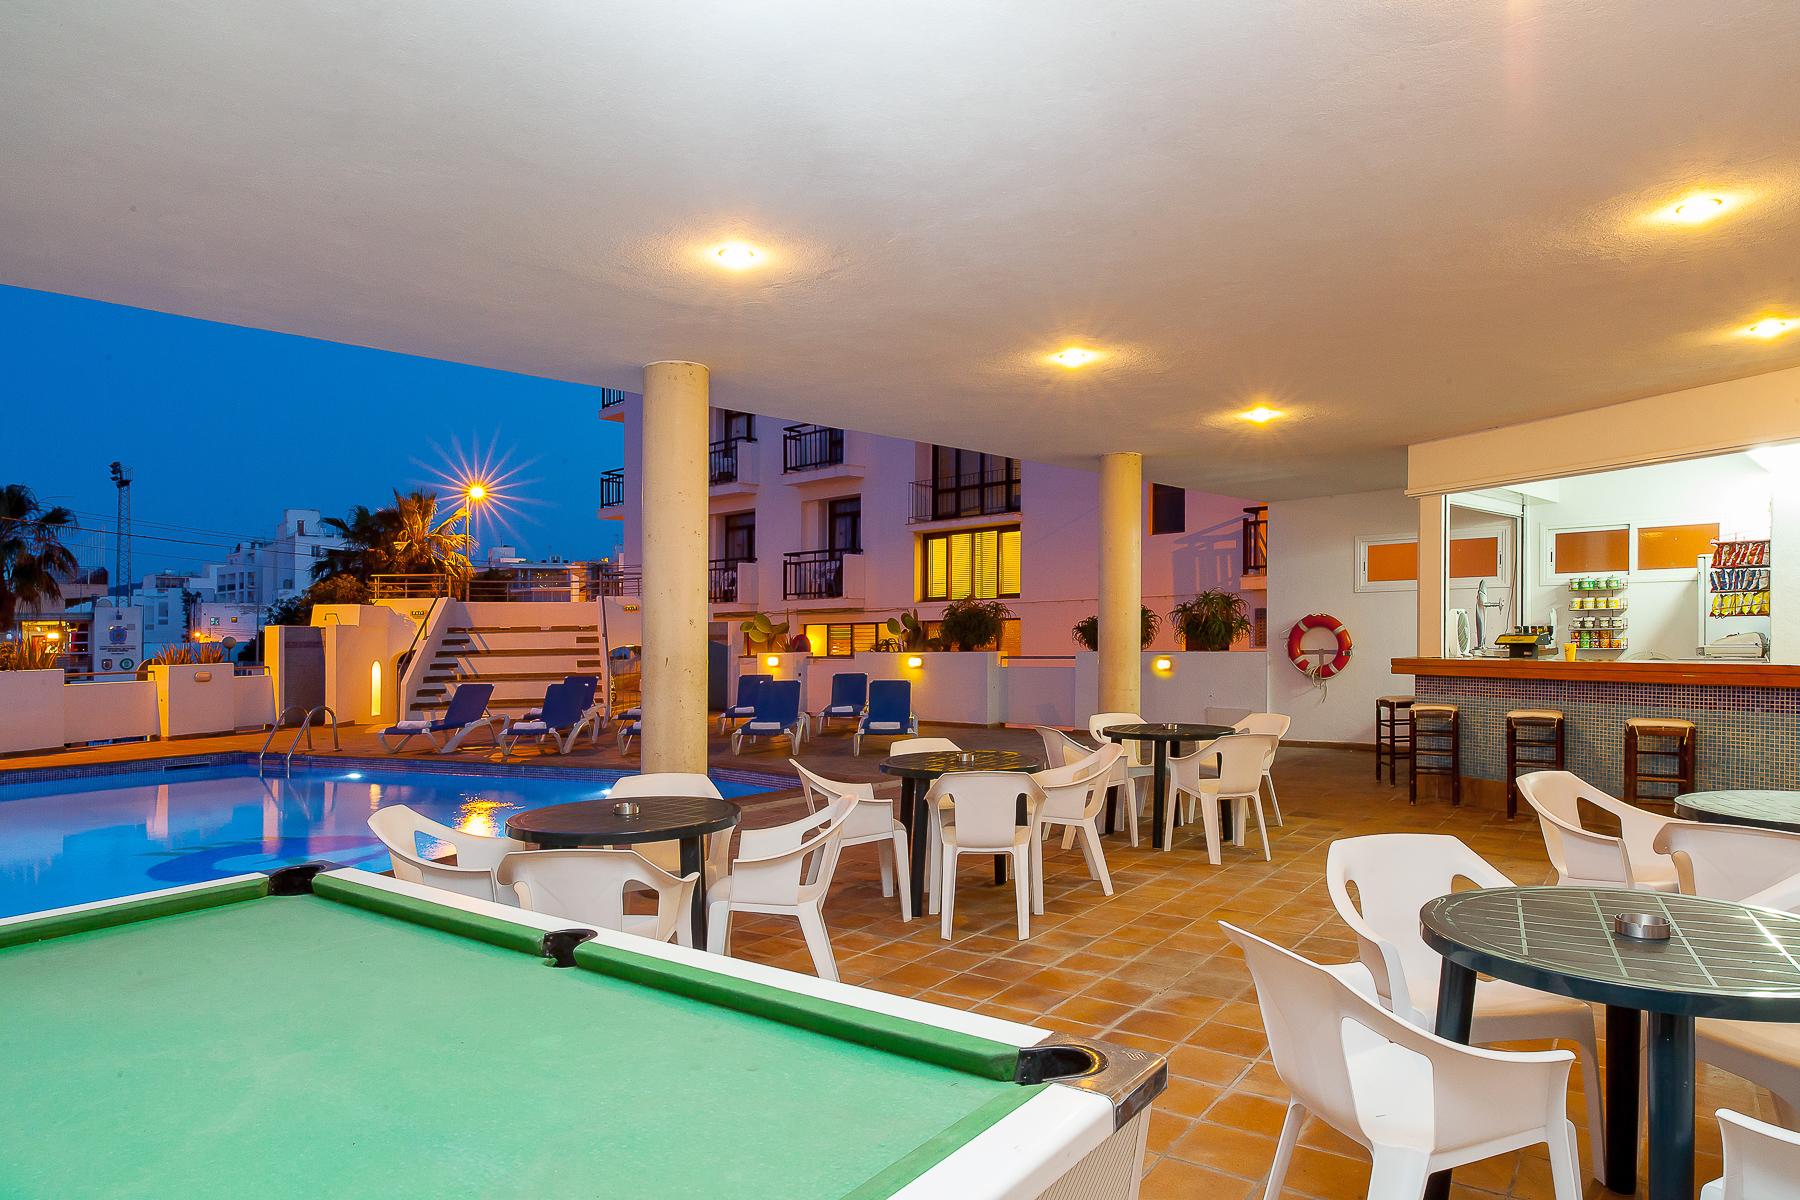 Hotel Galera - Image Gallery of rooms, hotel services, pool, breakfasts